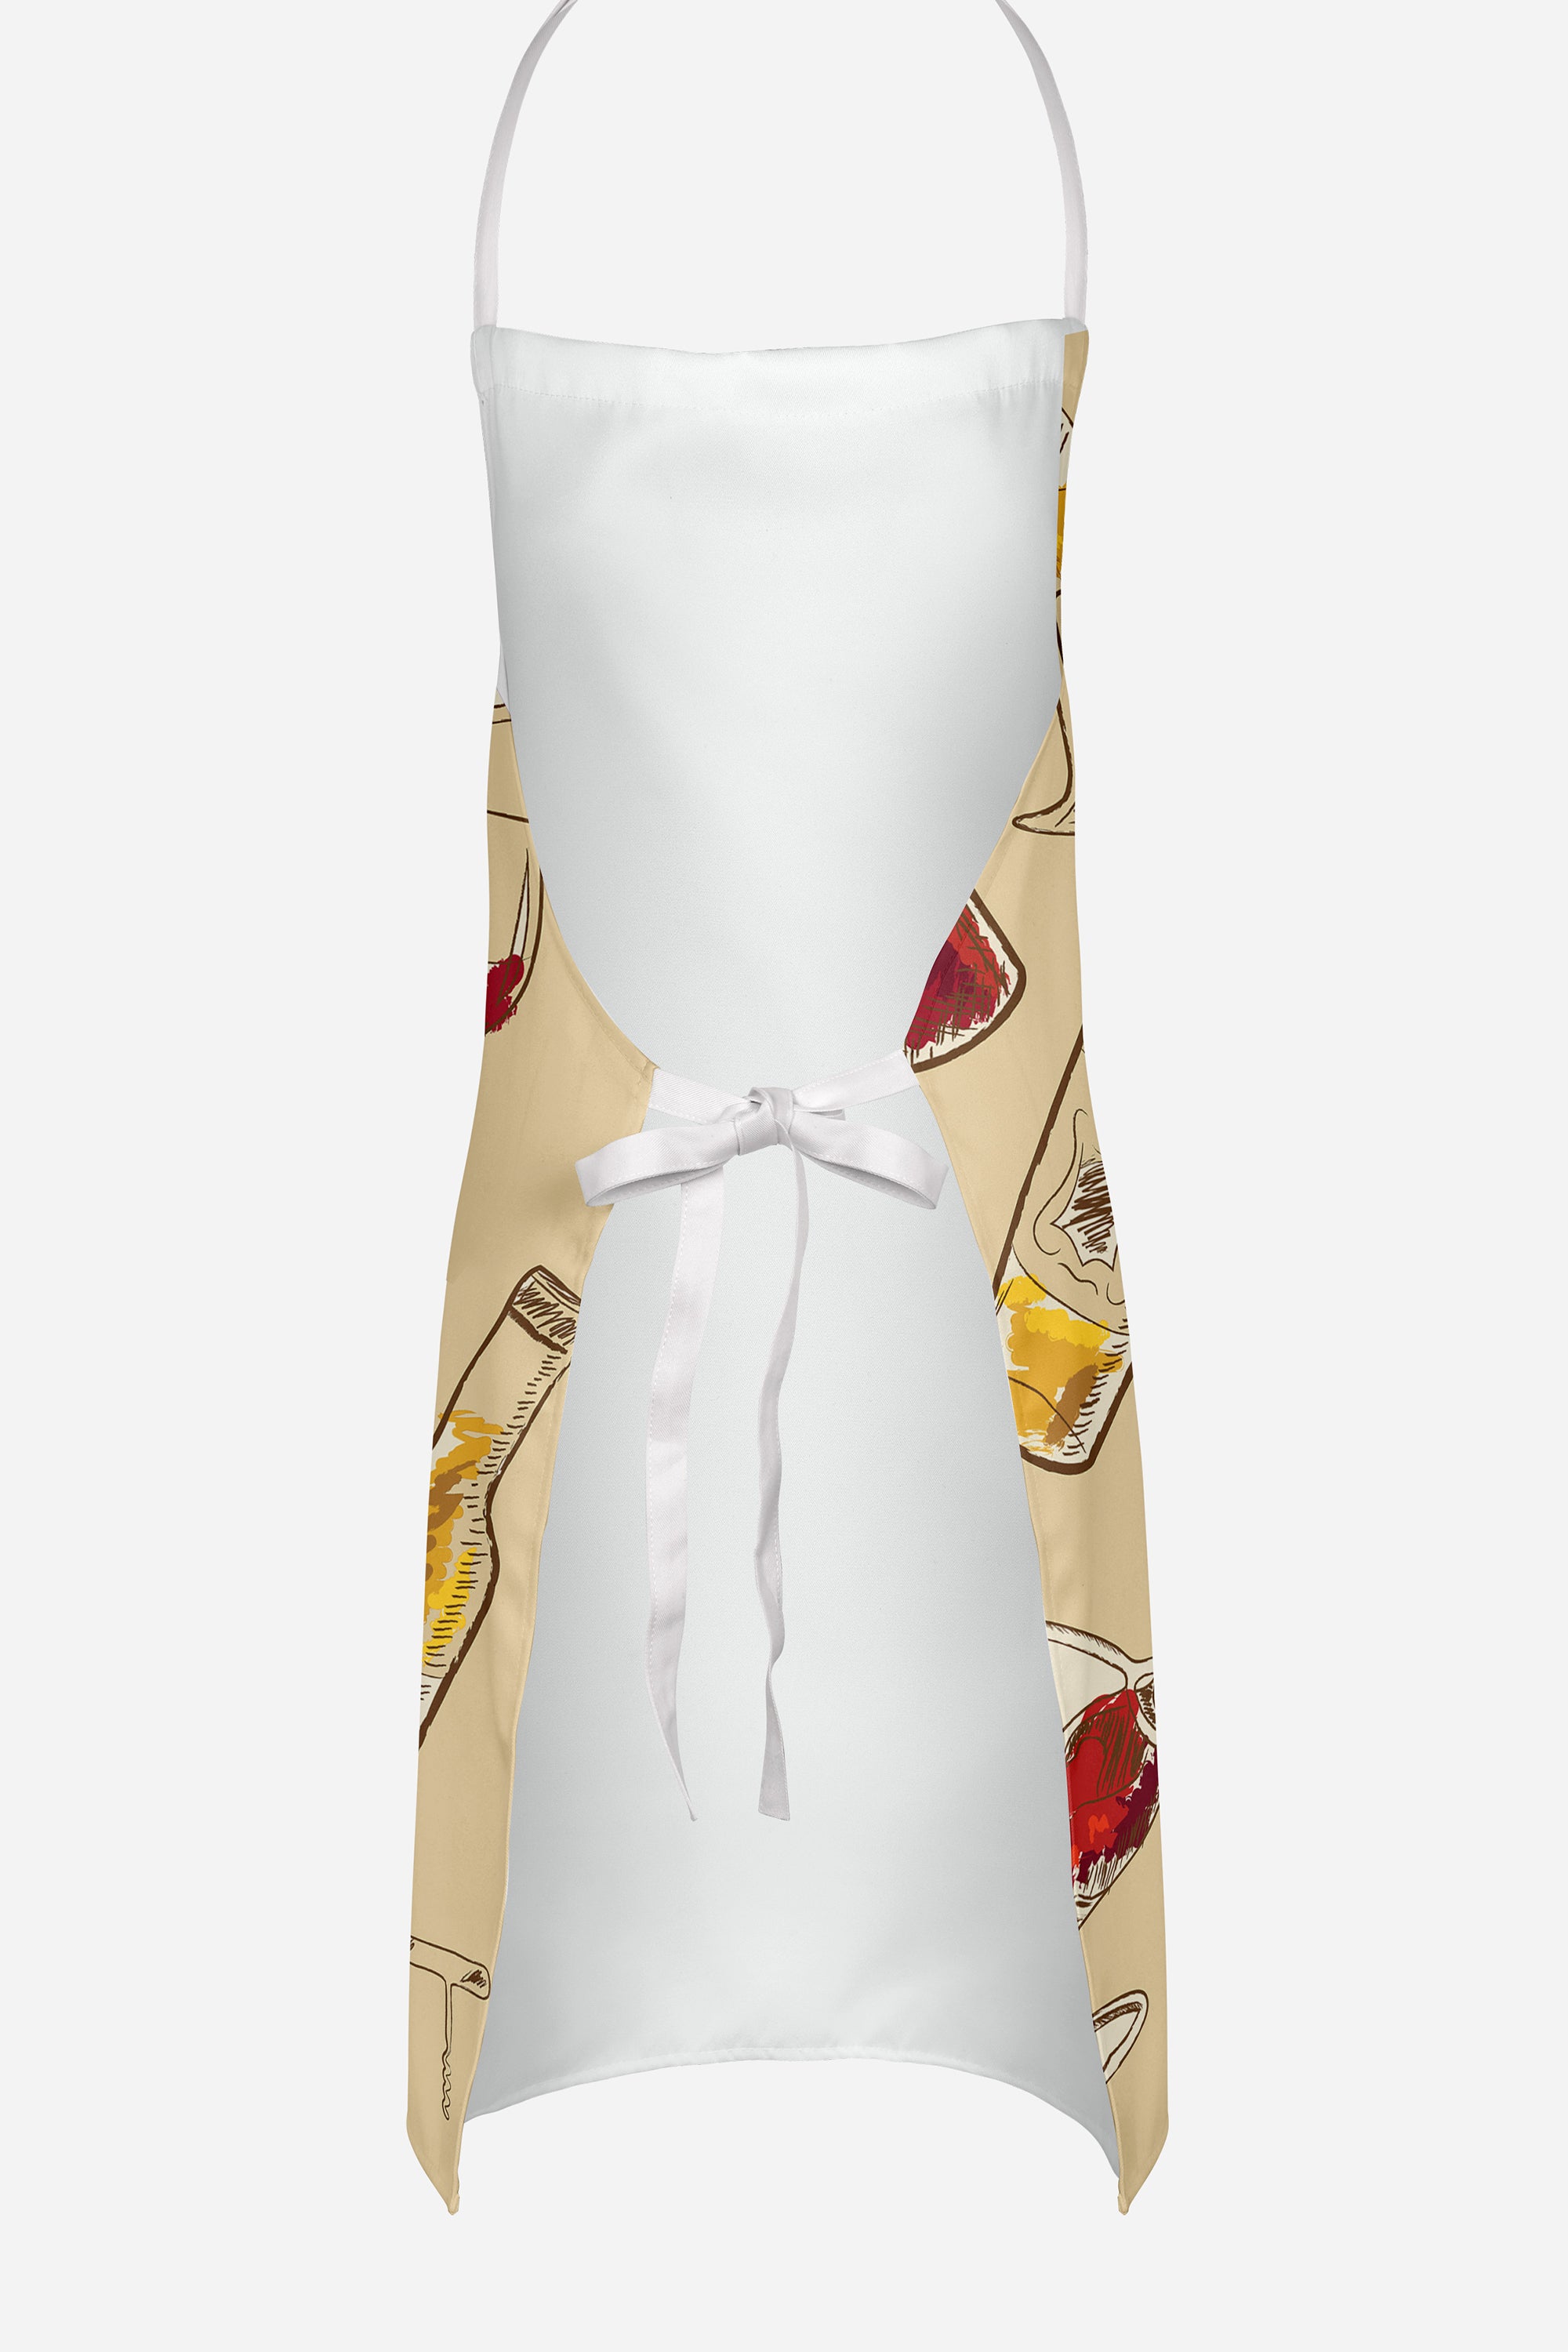 Red and White Wine Apron BB5196APRON